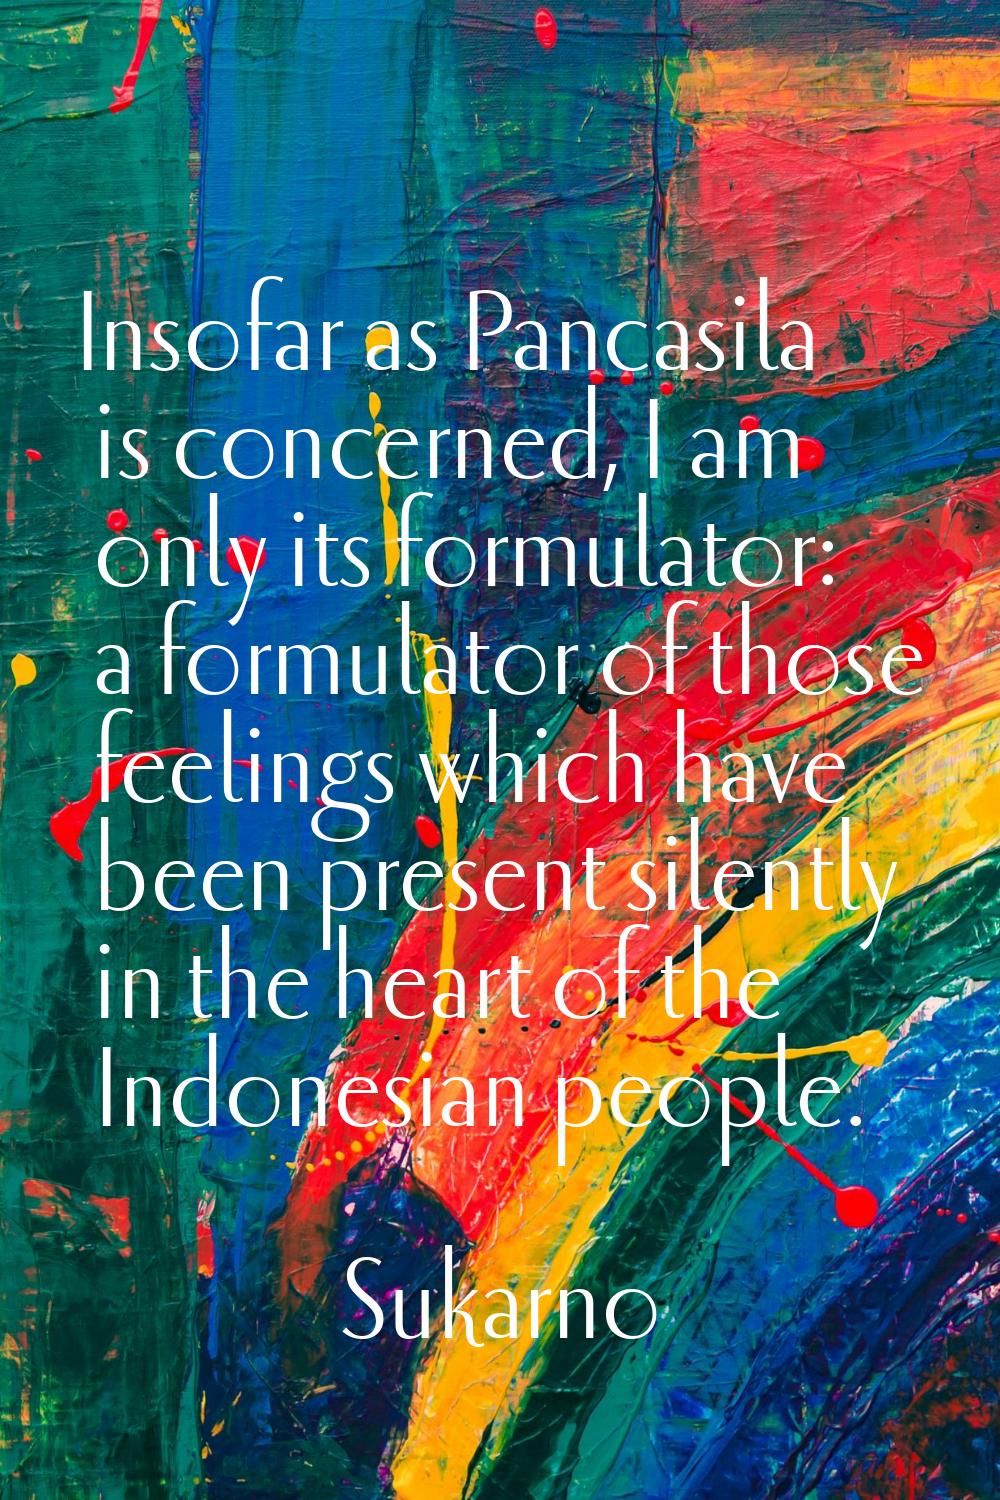 Insofar as Pancasila is concerned, I am only its formulator: a formulator of those feelings which h